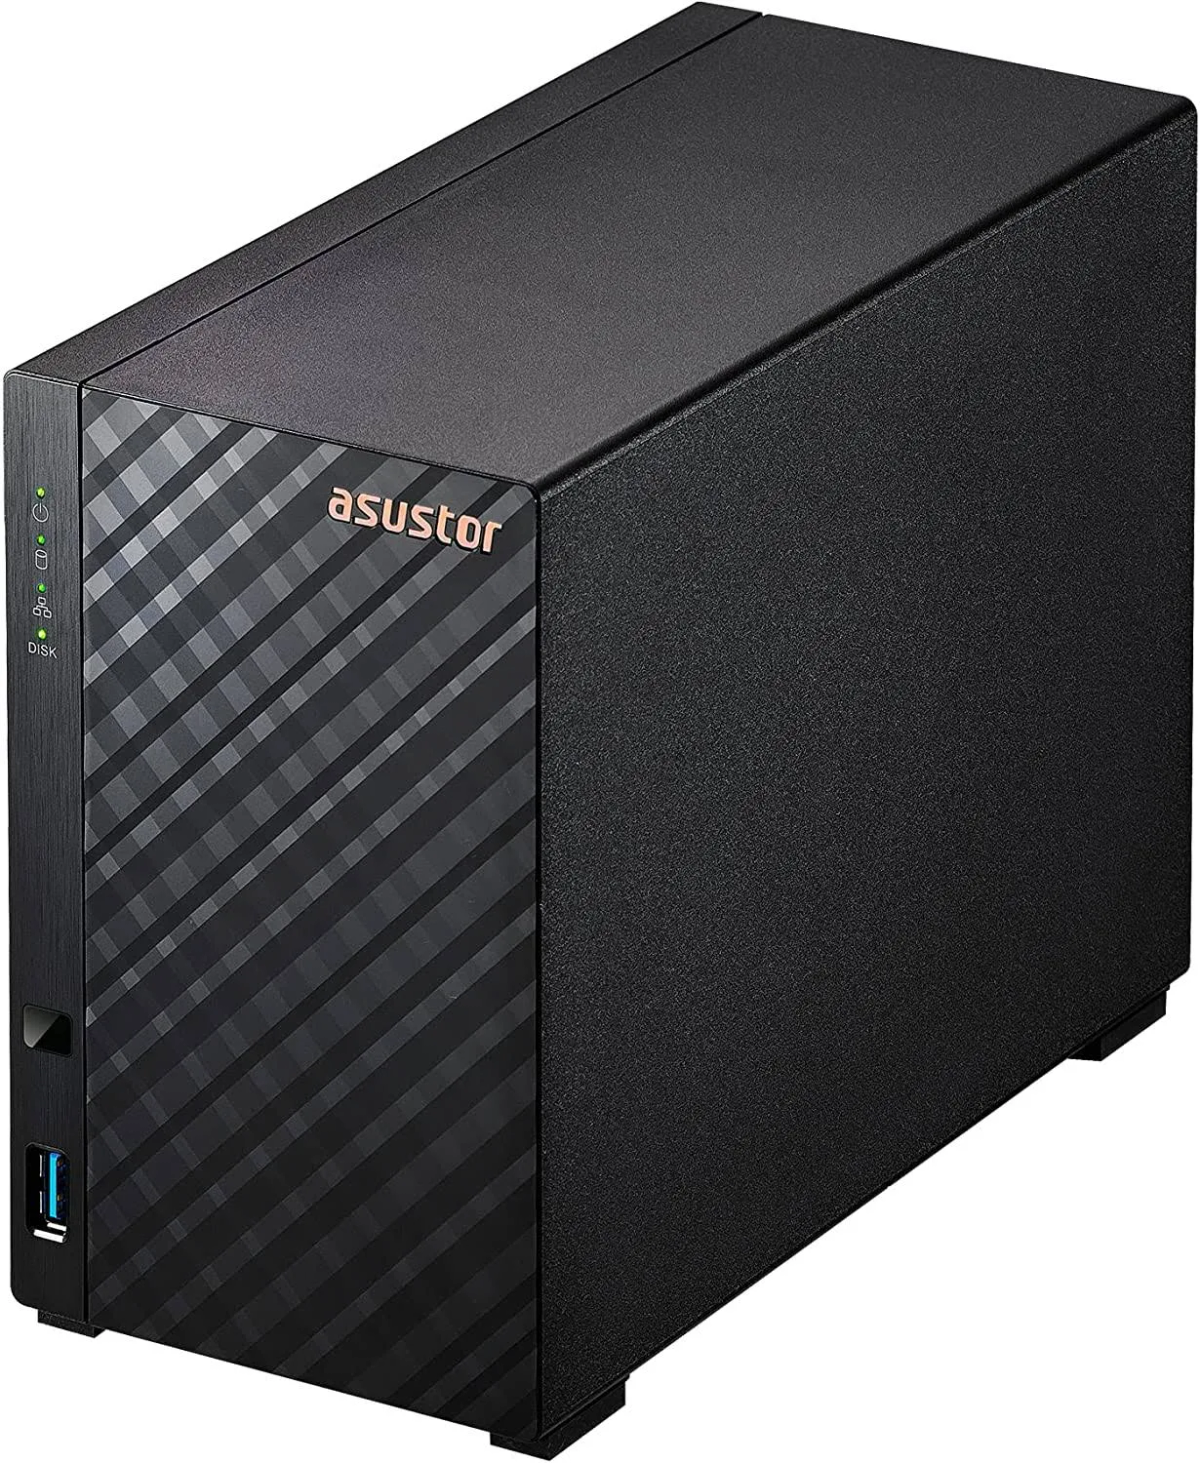 ASUSTOR 80-AS1102T00-MA-0 0 3,5 Zoll TB